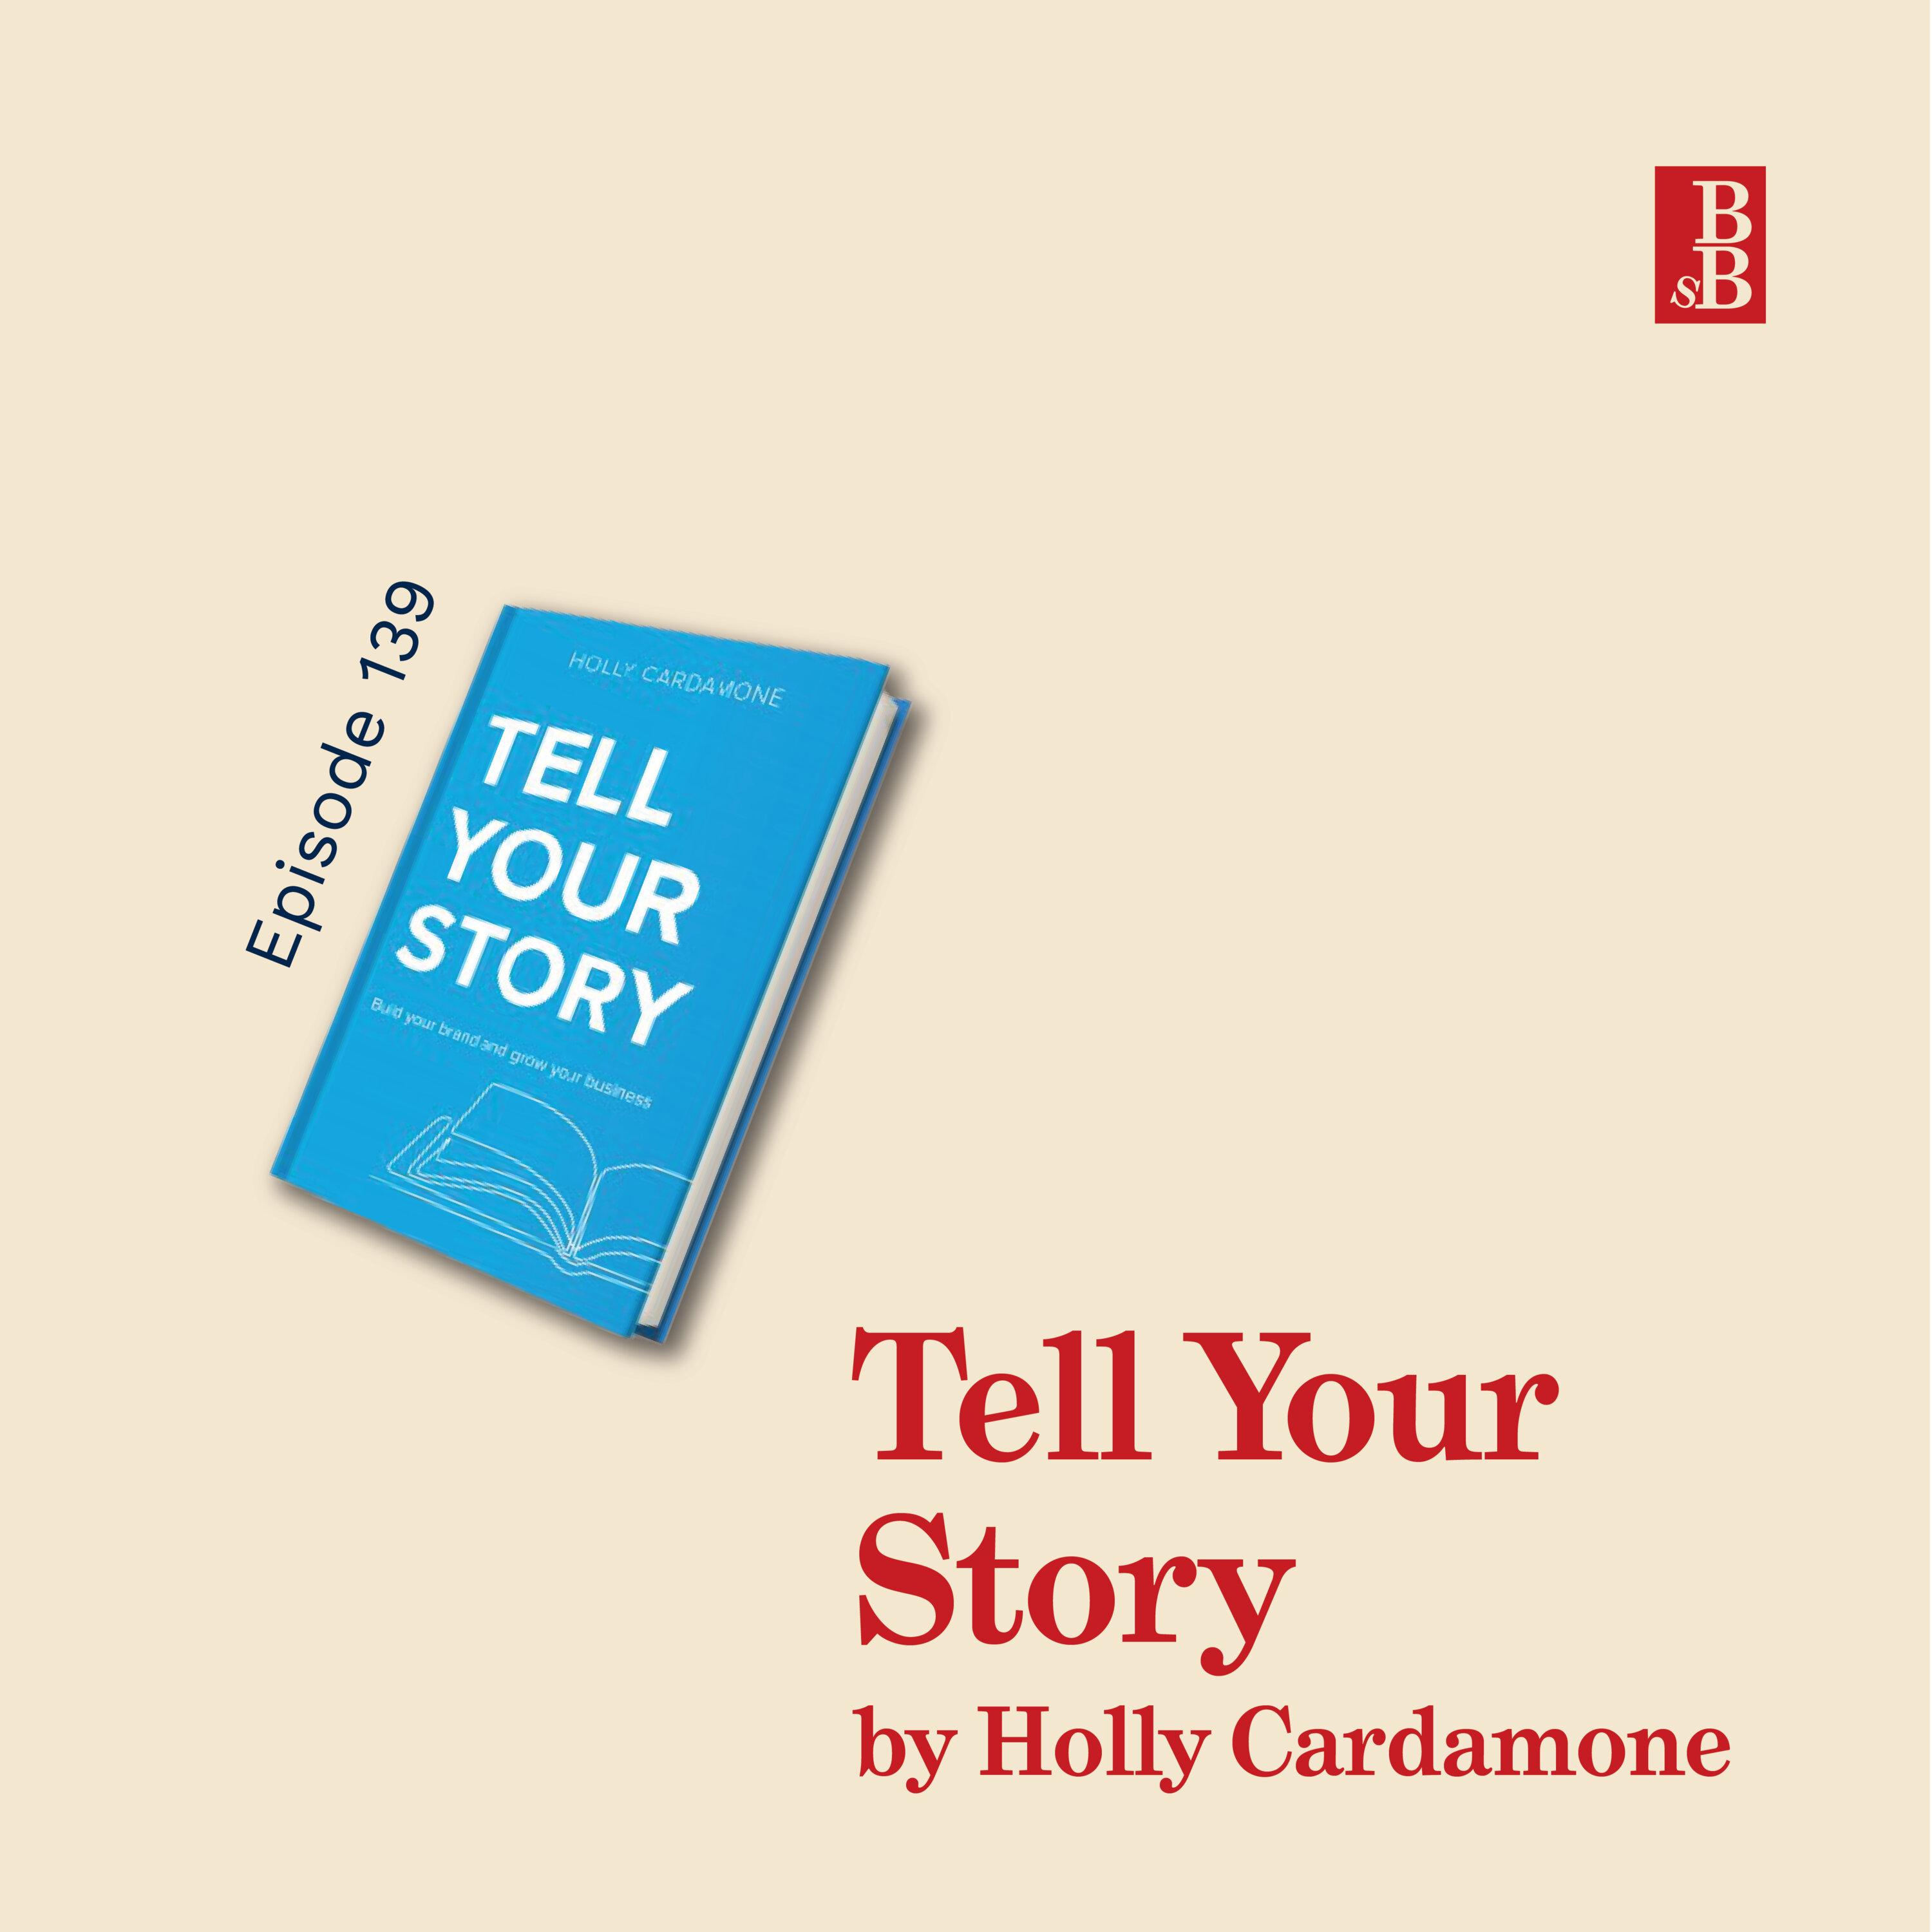 Tell Your Story by Holly Cardamone: how to stop being a boring business writer Image